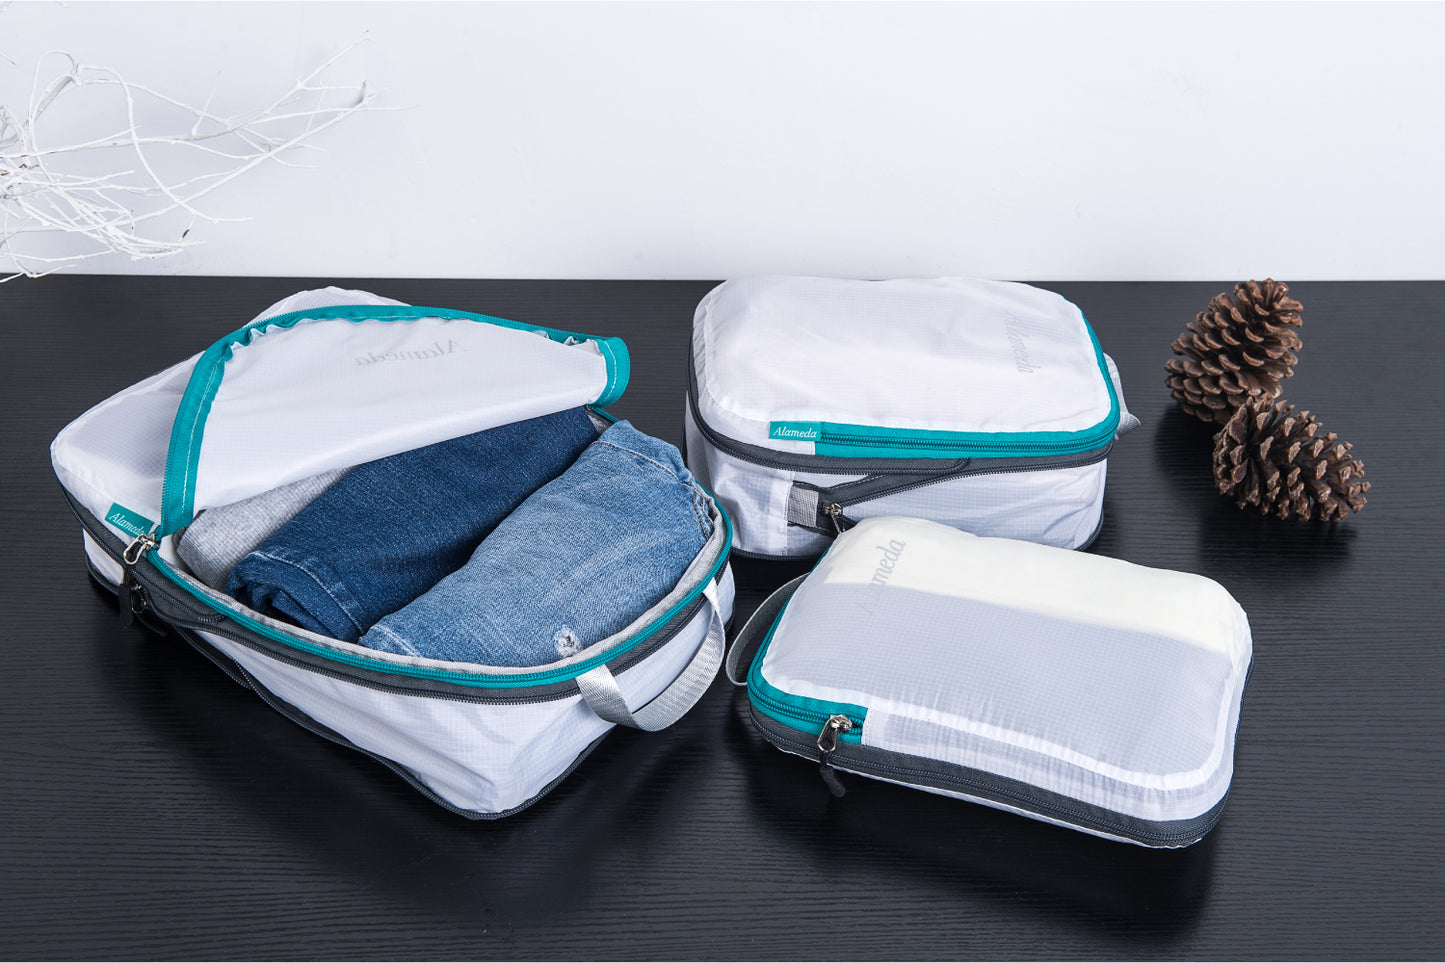 Compression Packing Cubes, Travel Packing Organizer Bags for Luggage / Backpack - White, 3 Pack